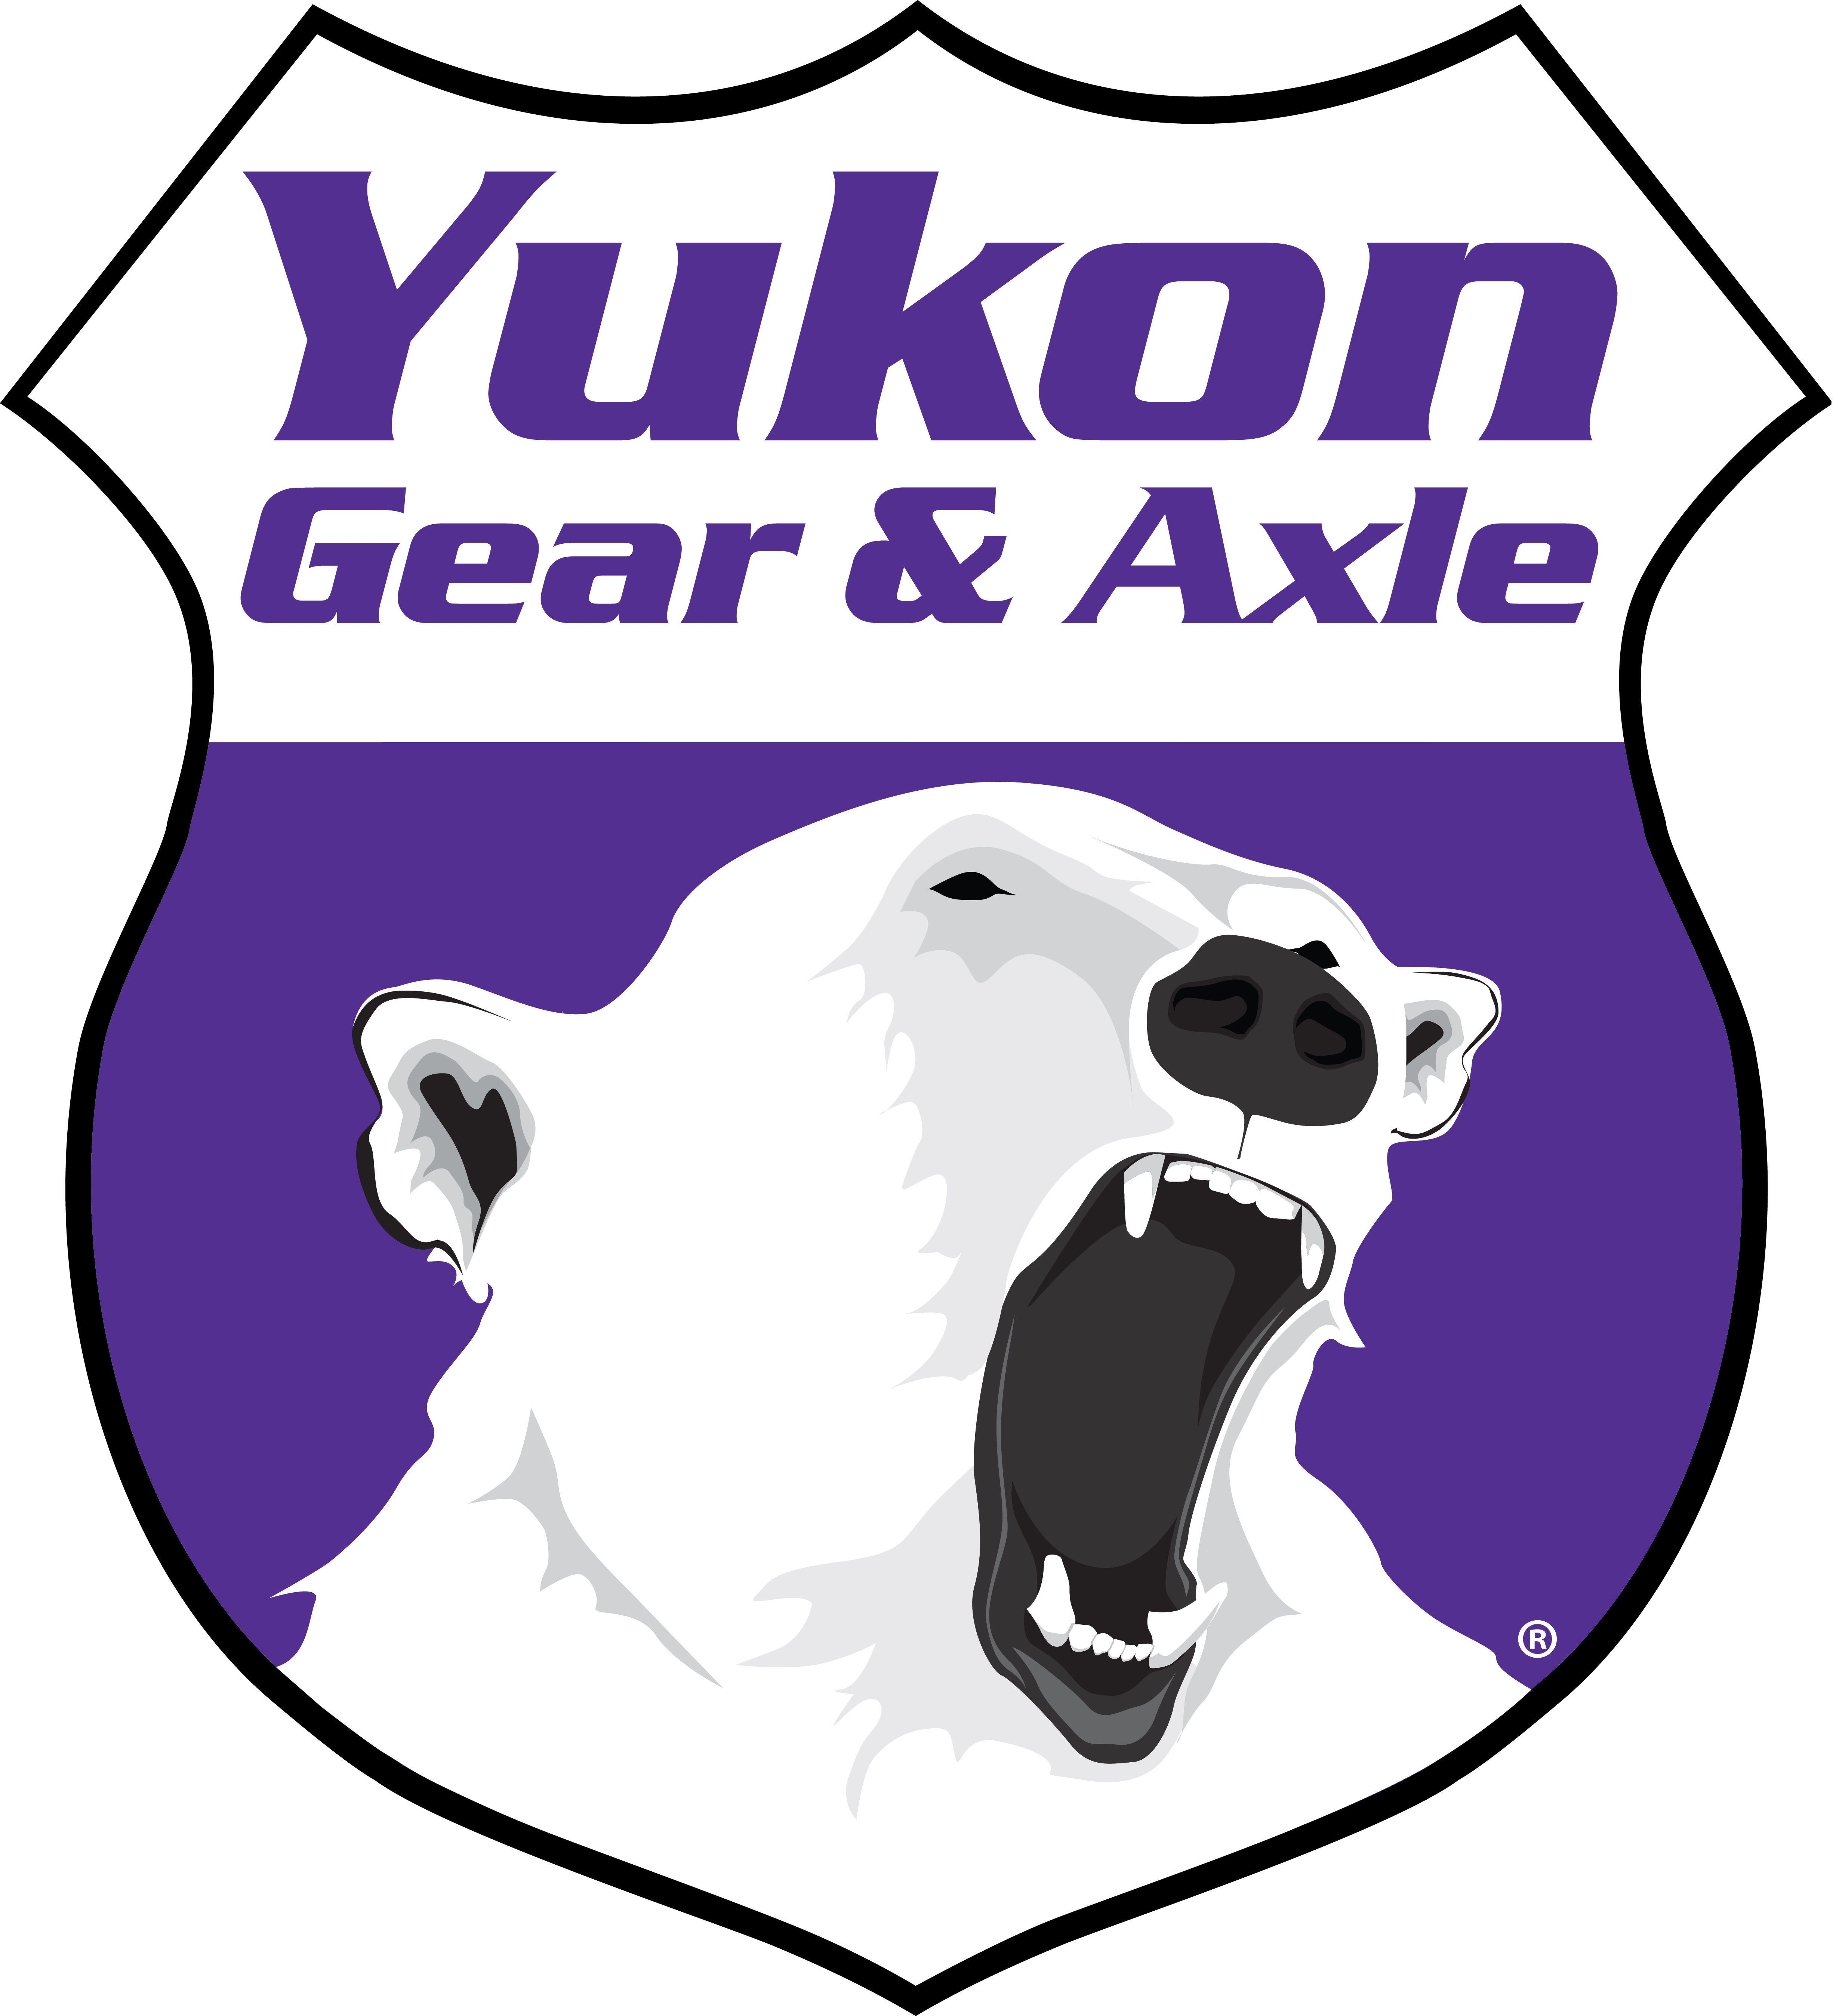 Yukon Minor install kit for Toyota '86 and newer 8" differential 